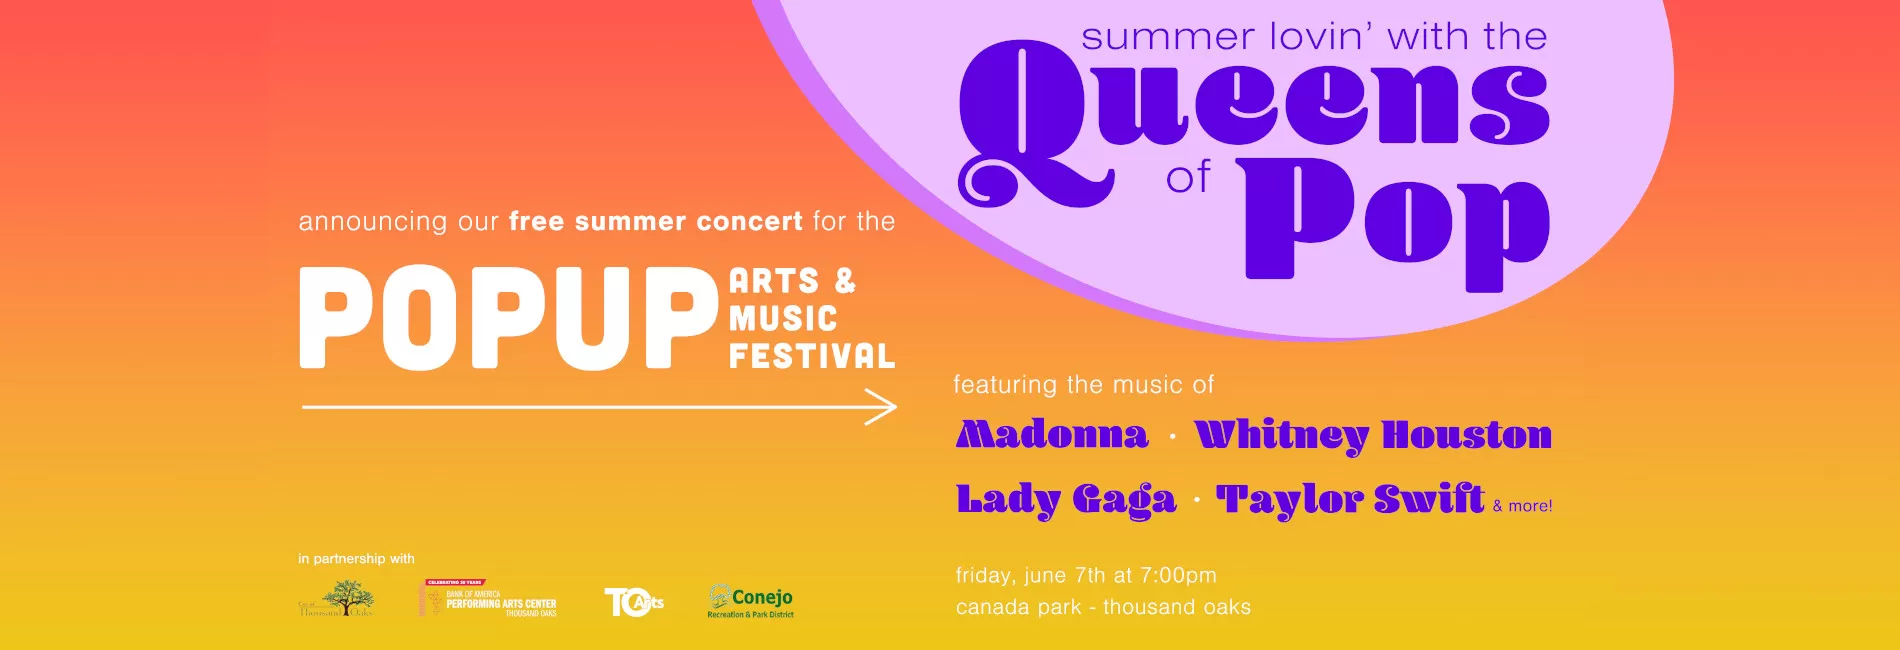 5-Star Summer Lovin’ with the Queens of the Pop Age: Madonna, Whitney, Gaga and Taylor